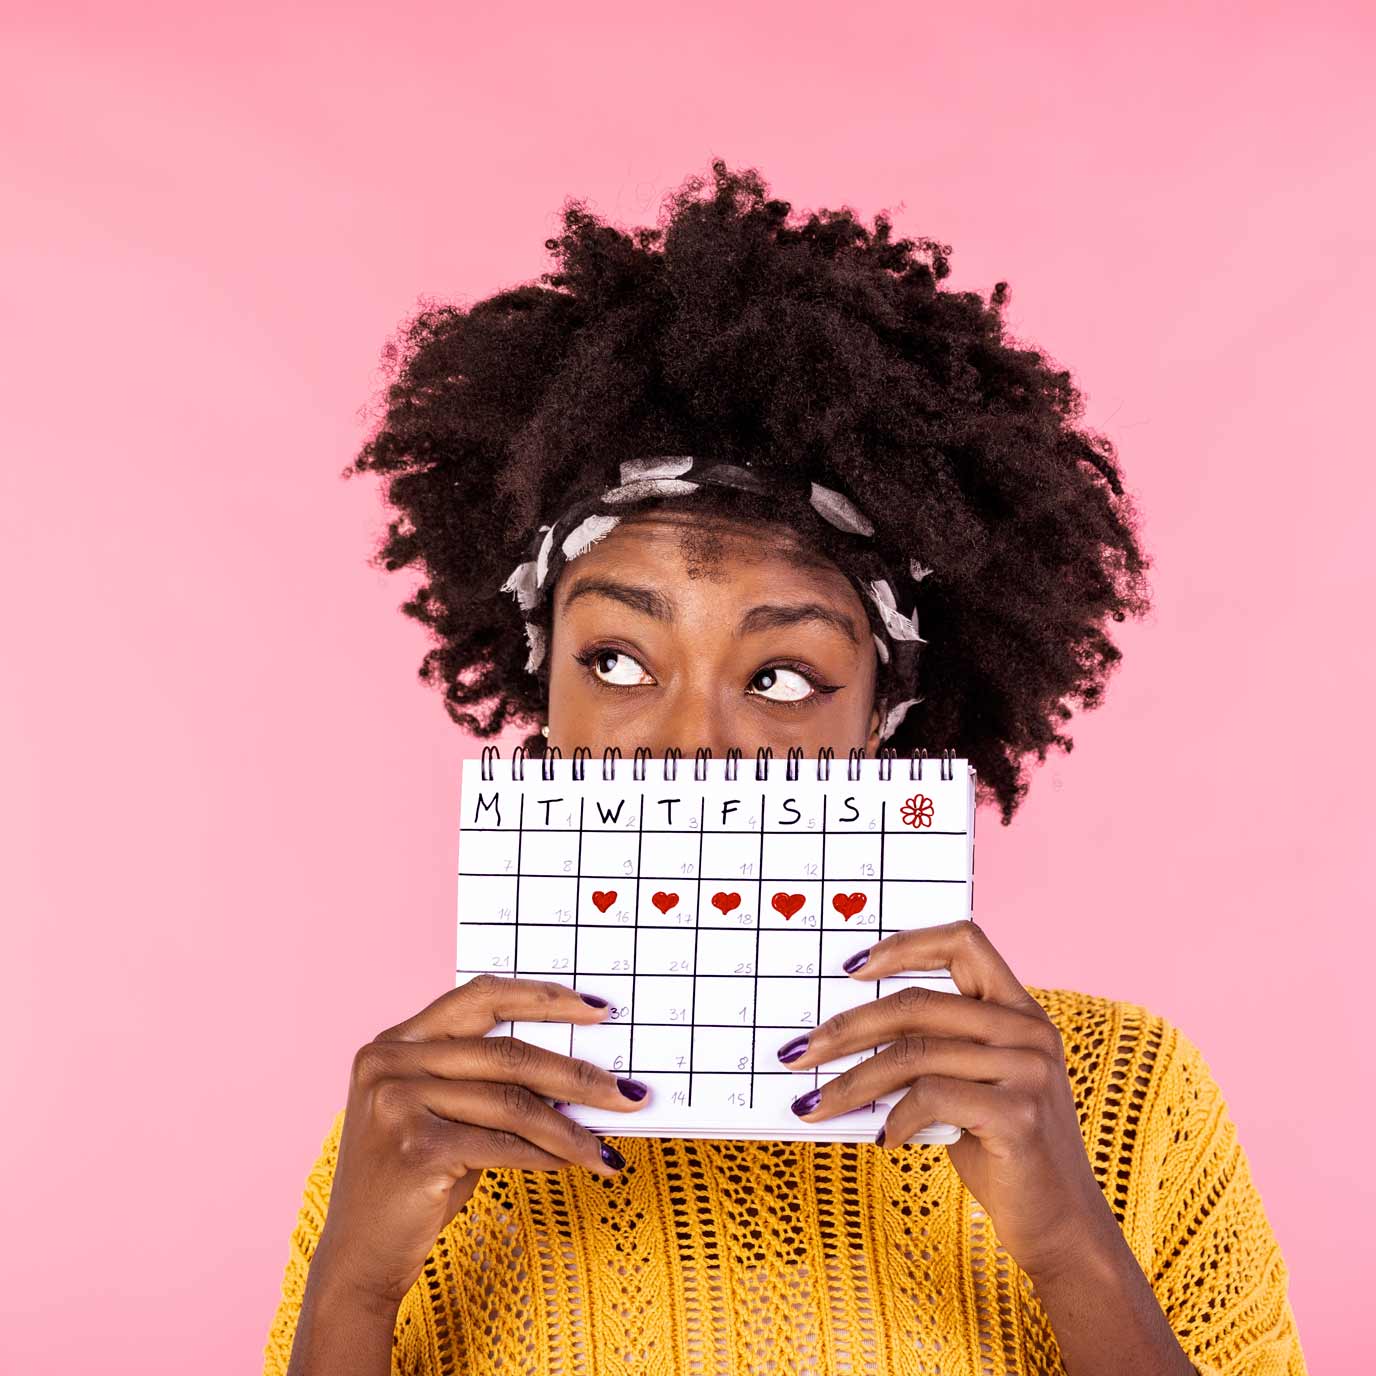 Read about the benefits of tracking your menstrual cycle in your 20s, 30s and 40s